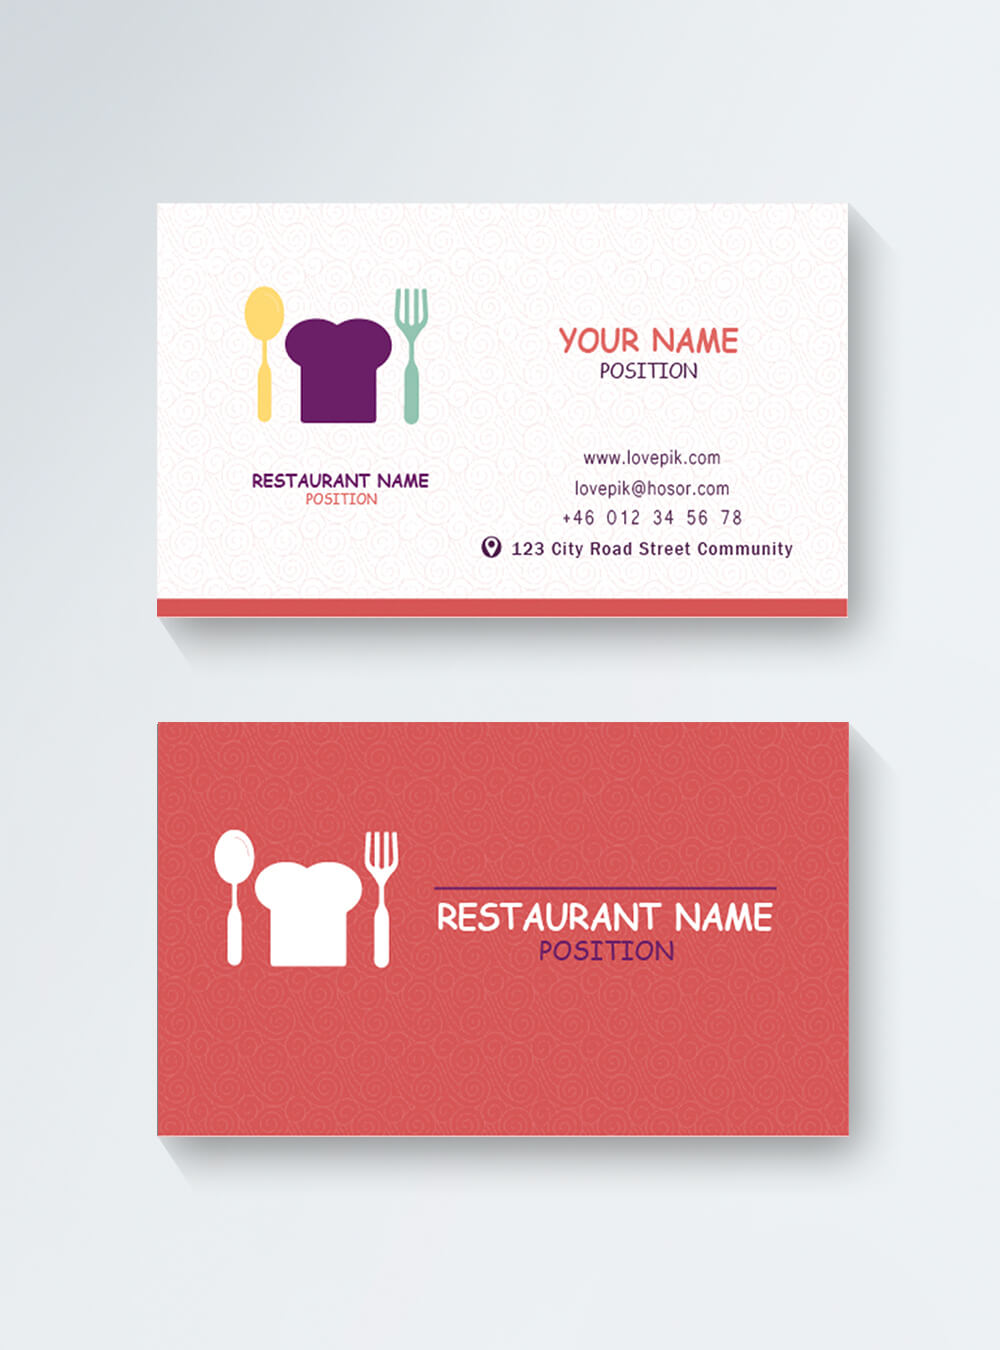 Leisure Restaurant Food Business Card Template Image Picture Throughout Food Business Cards Templates Free